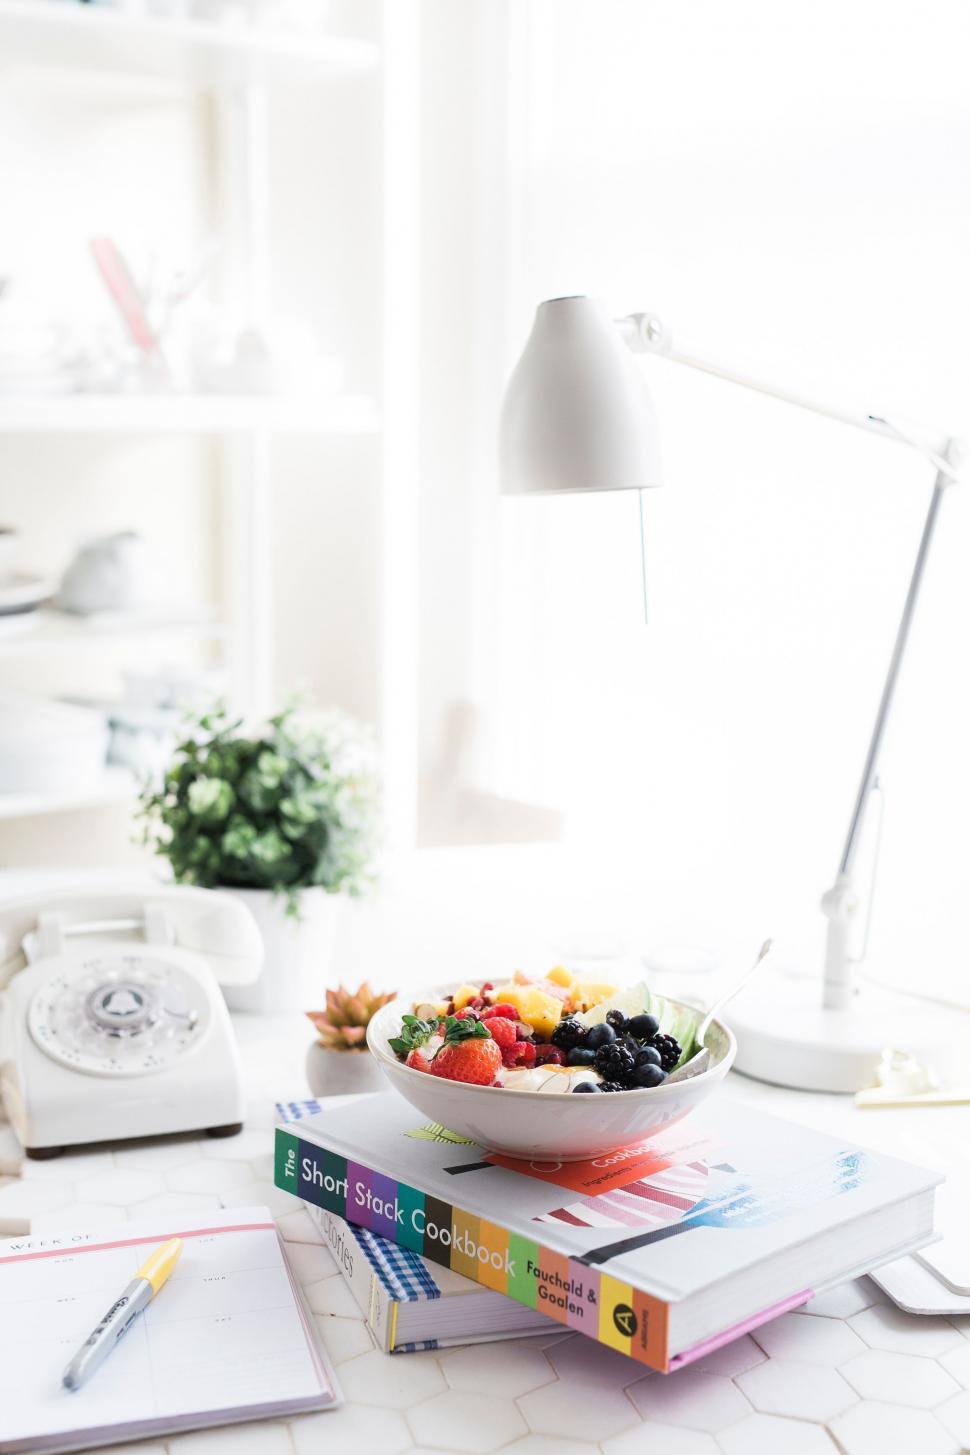 Free Image of Bowl of Fruit on Stack of Books 